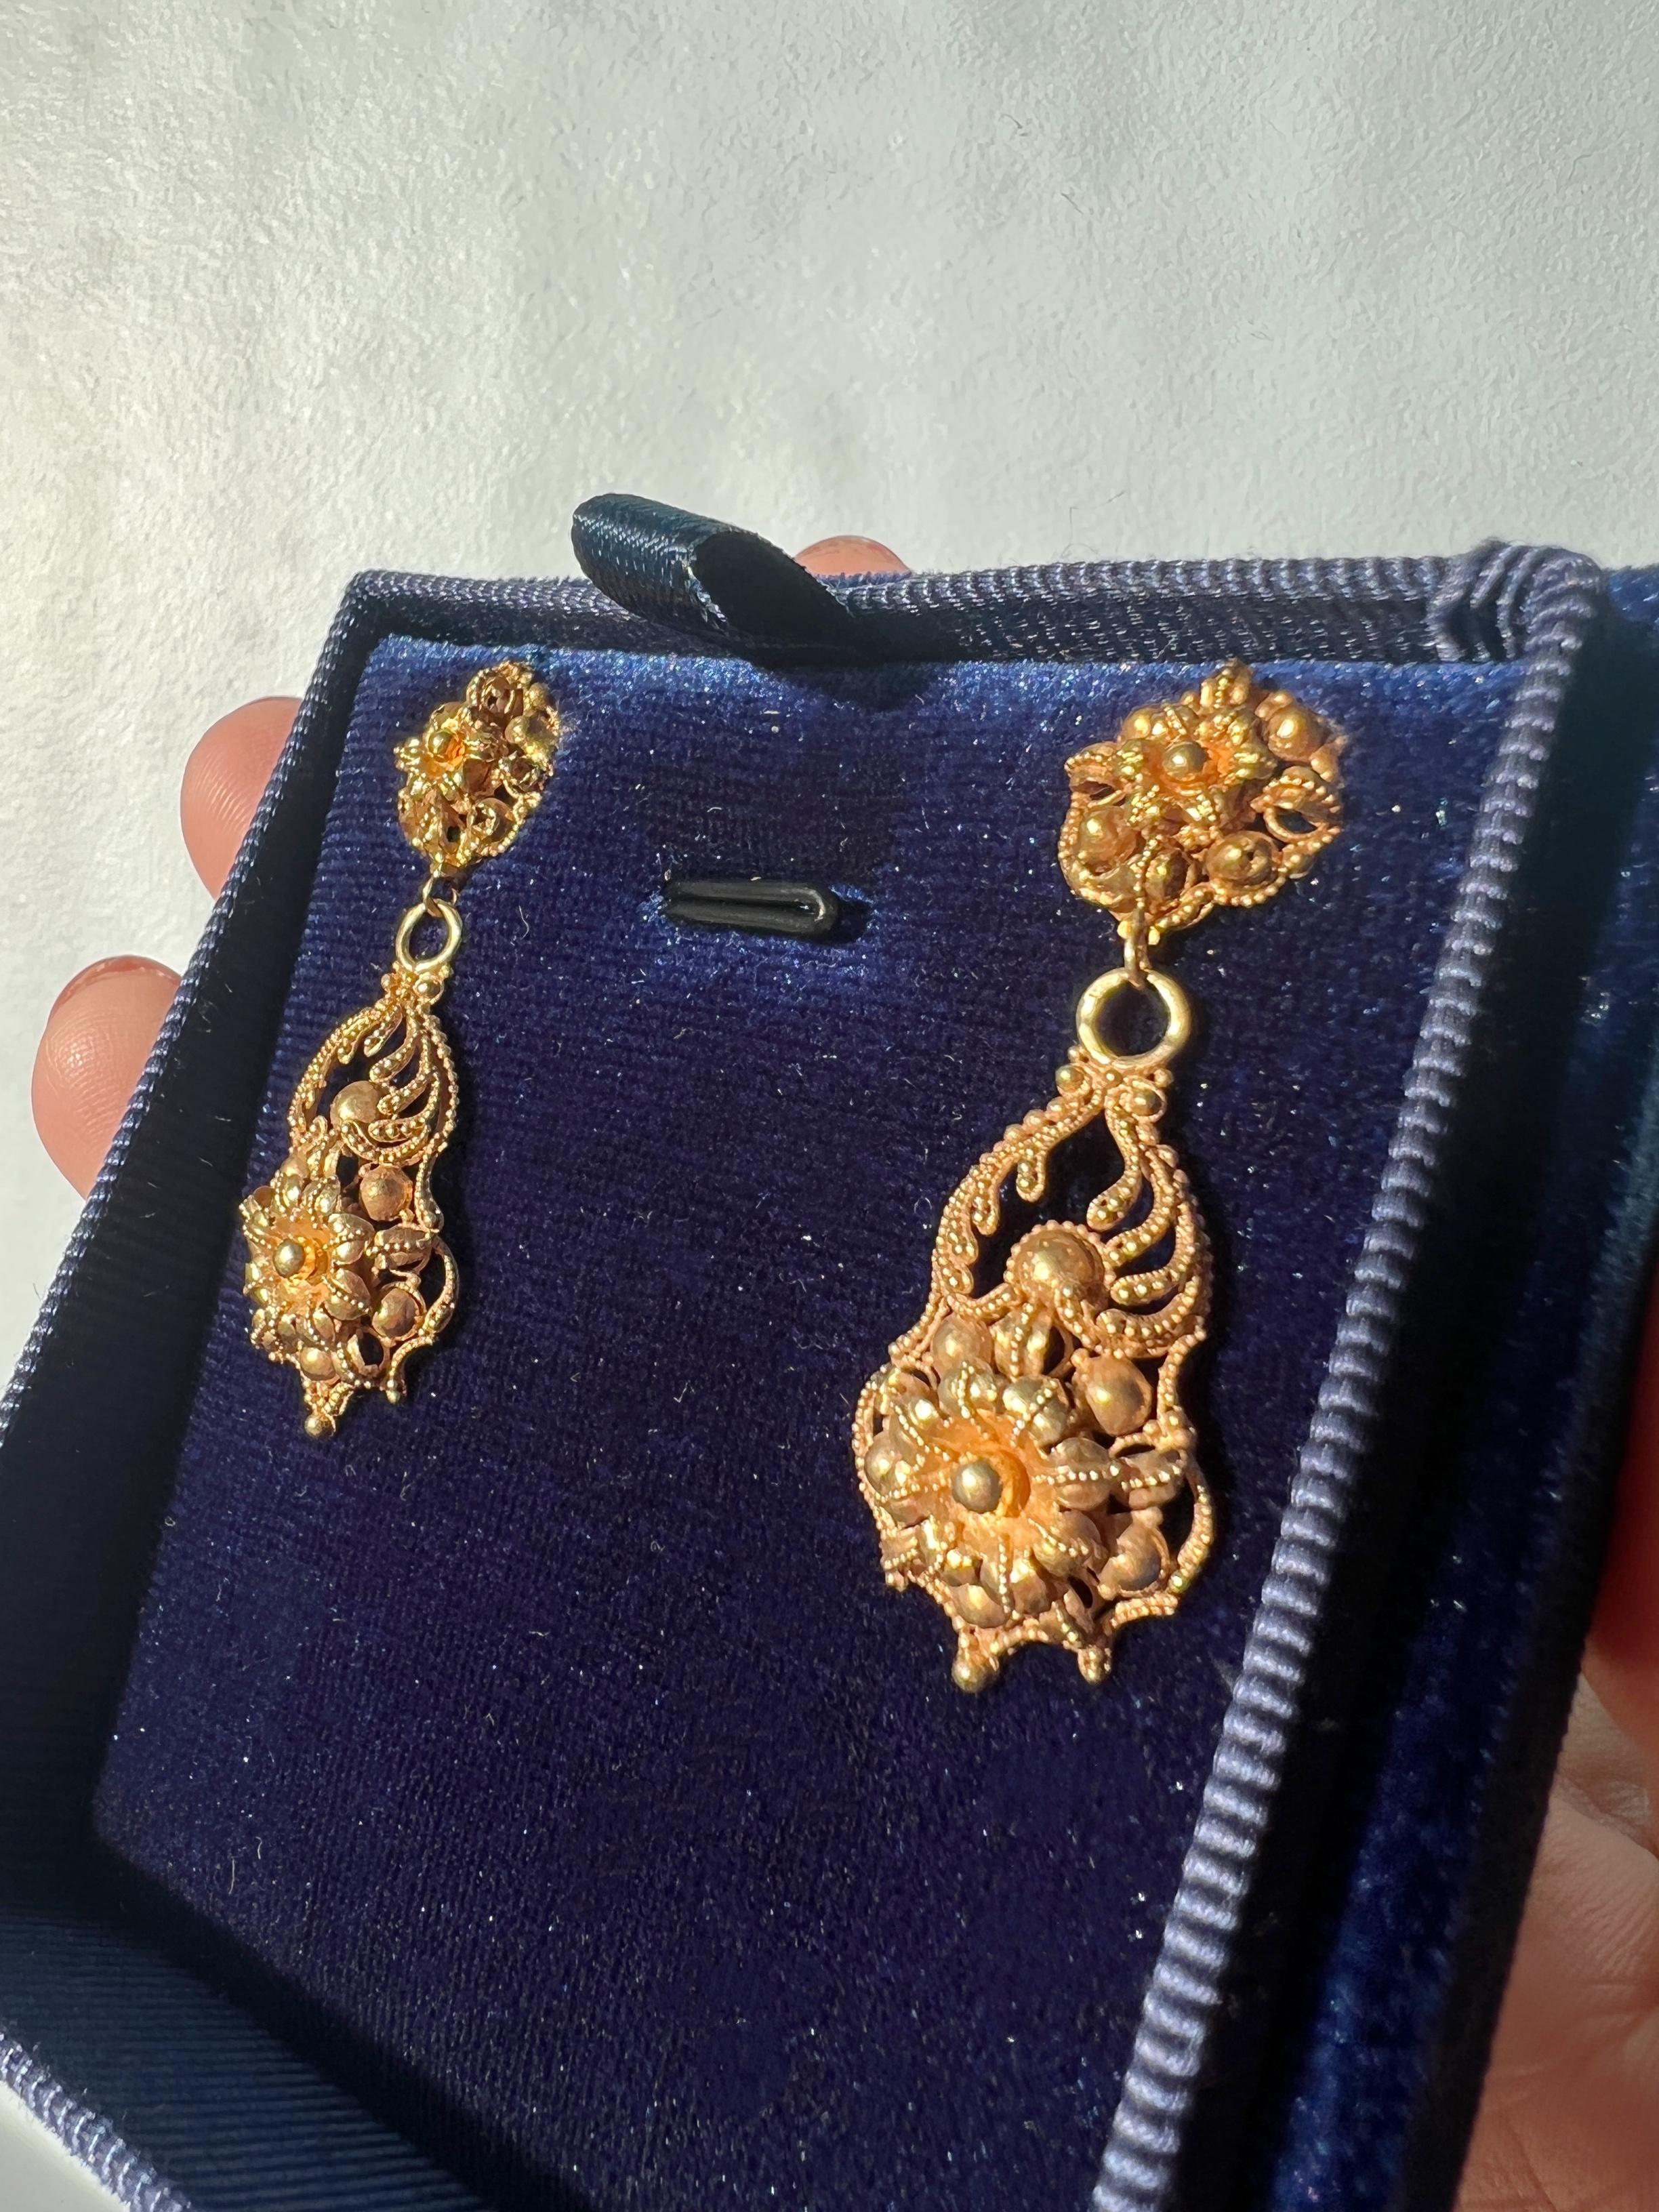 Gold earrings are an absolute jewellery box staple. Here for sale a magnificent pair of 18K yellow gold earrings, combining ancient filigree goldsmith technique with a fresh touch of bright, warm and buttery golden color. On these textured earrings,